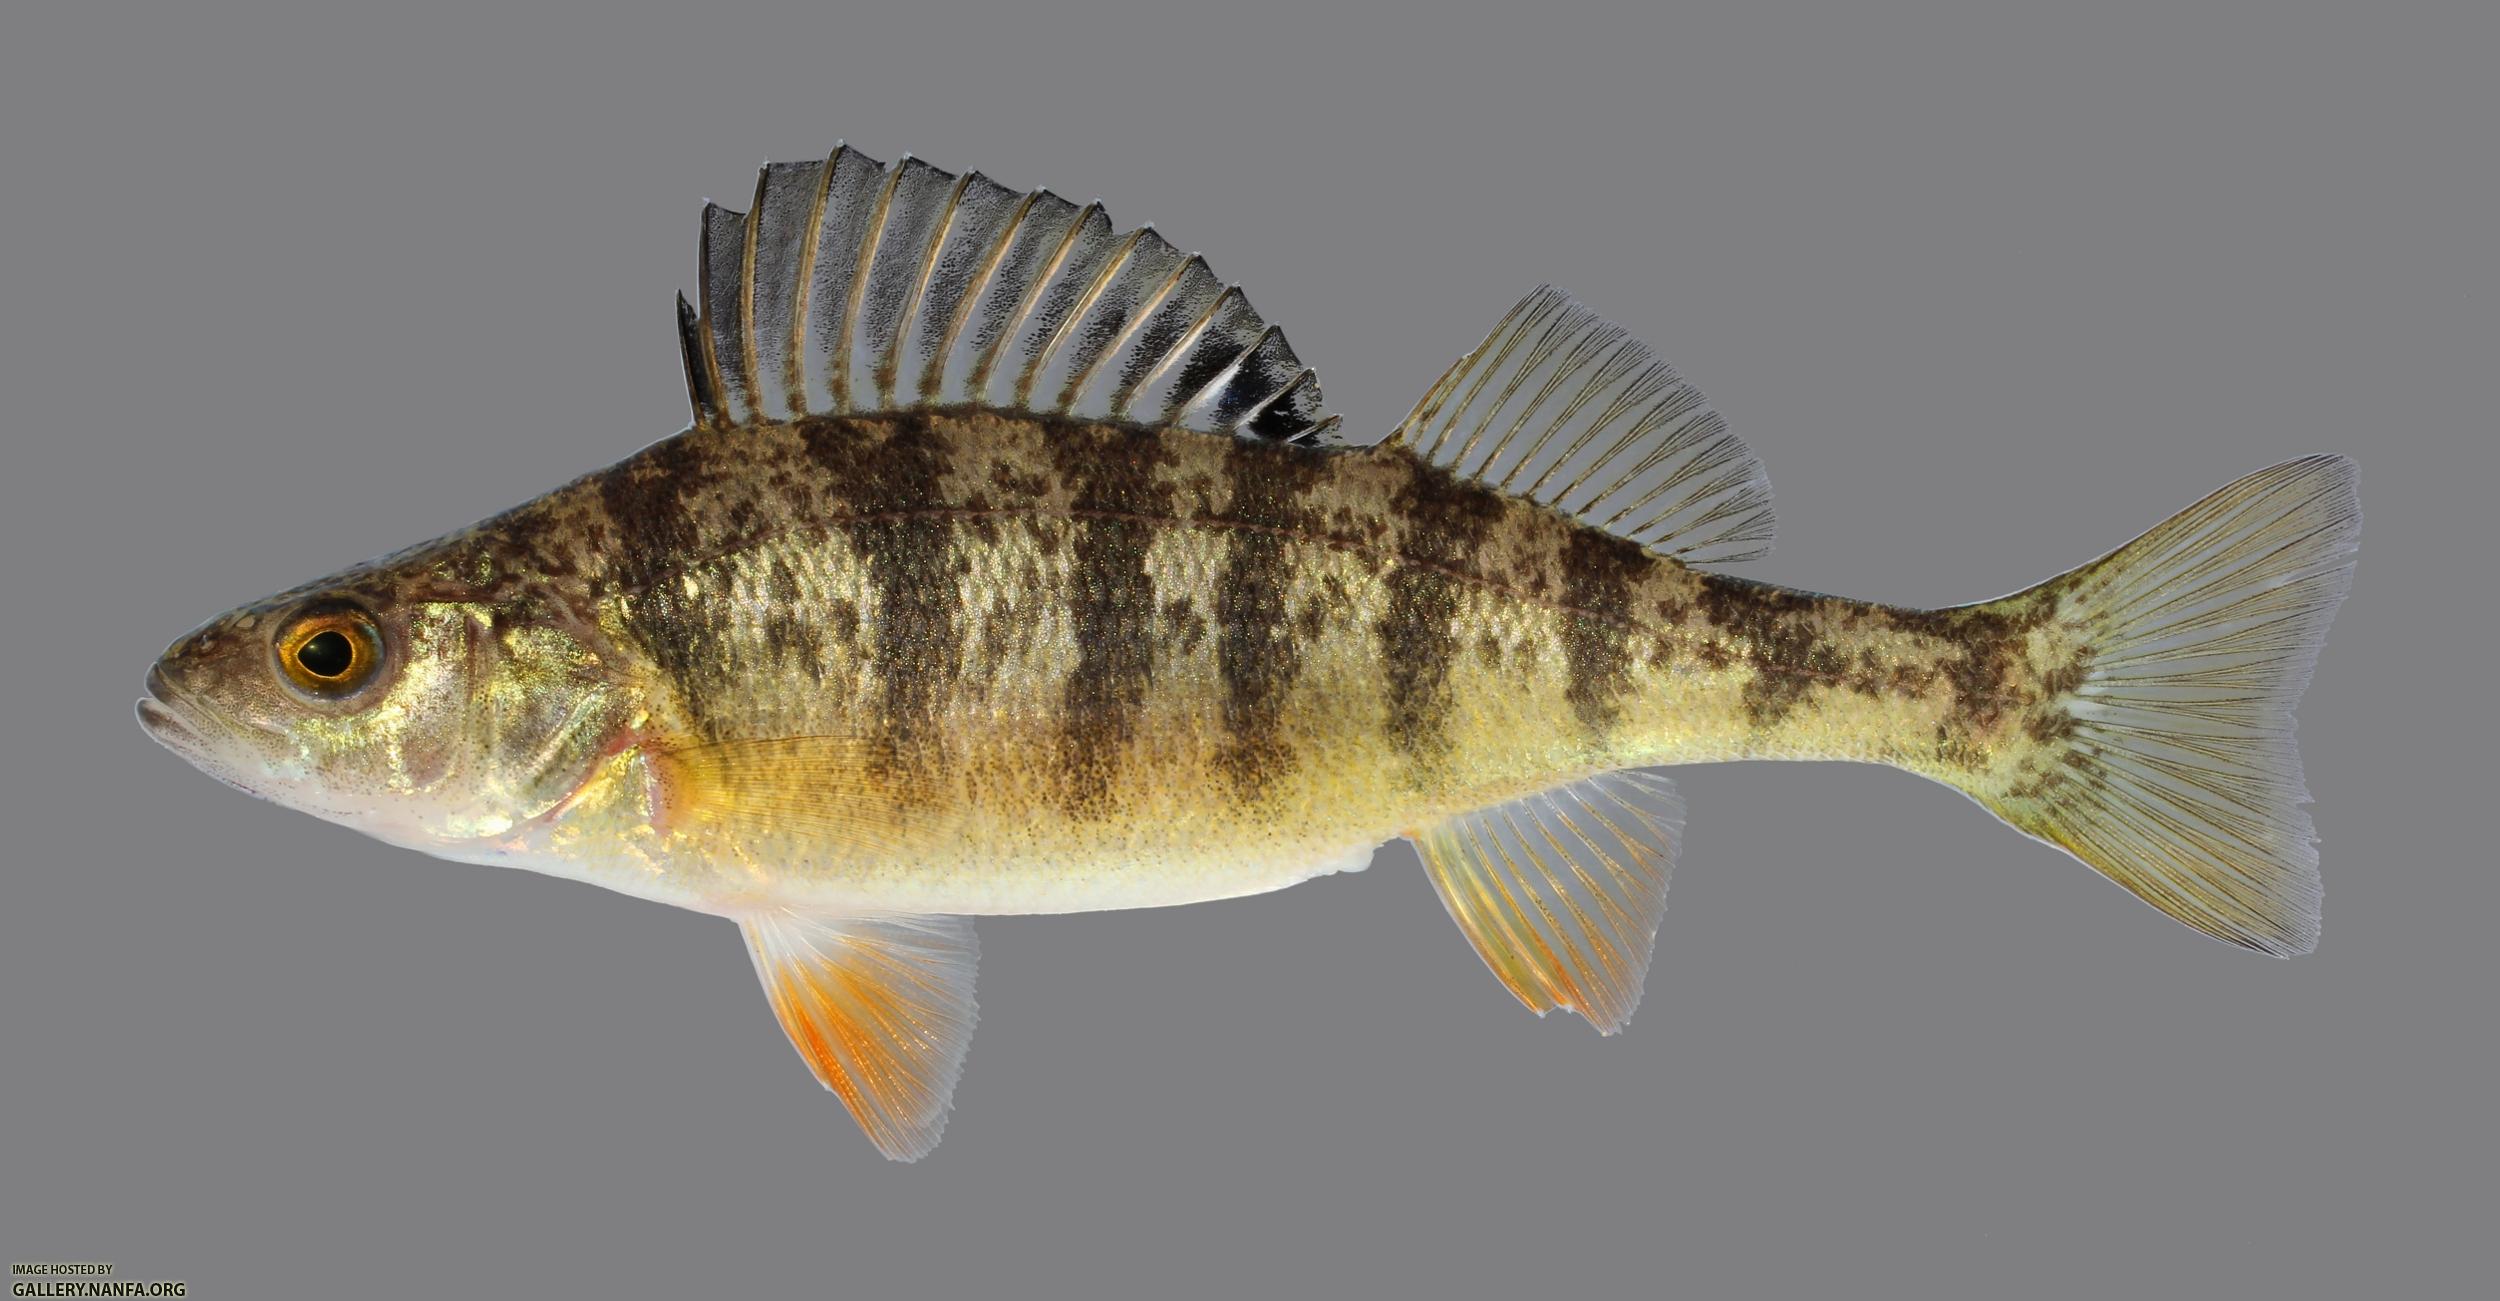 Transcriptomic response to soybean meal-based diets as the frst formulated feed in juvenile yellow perch (Perca favescens)